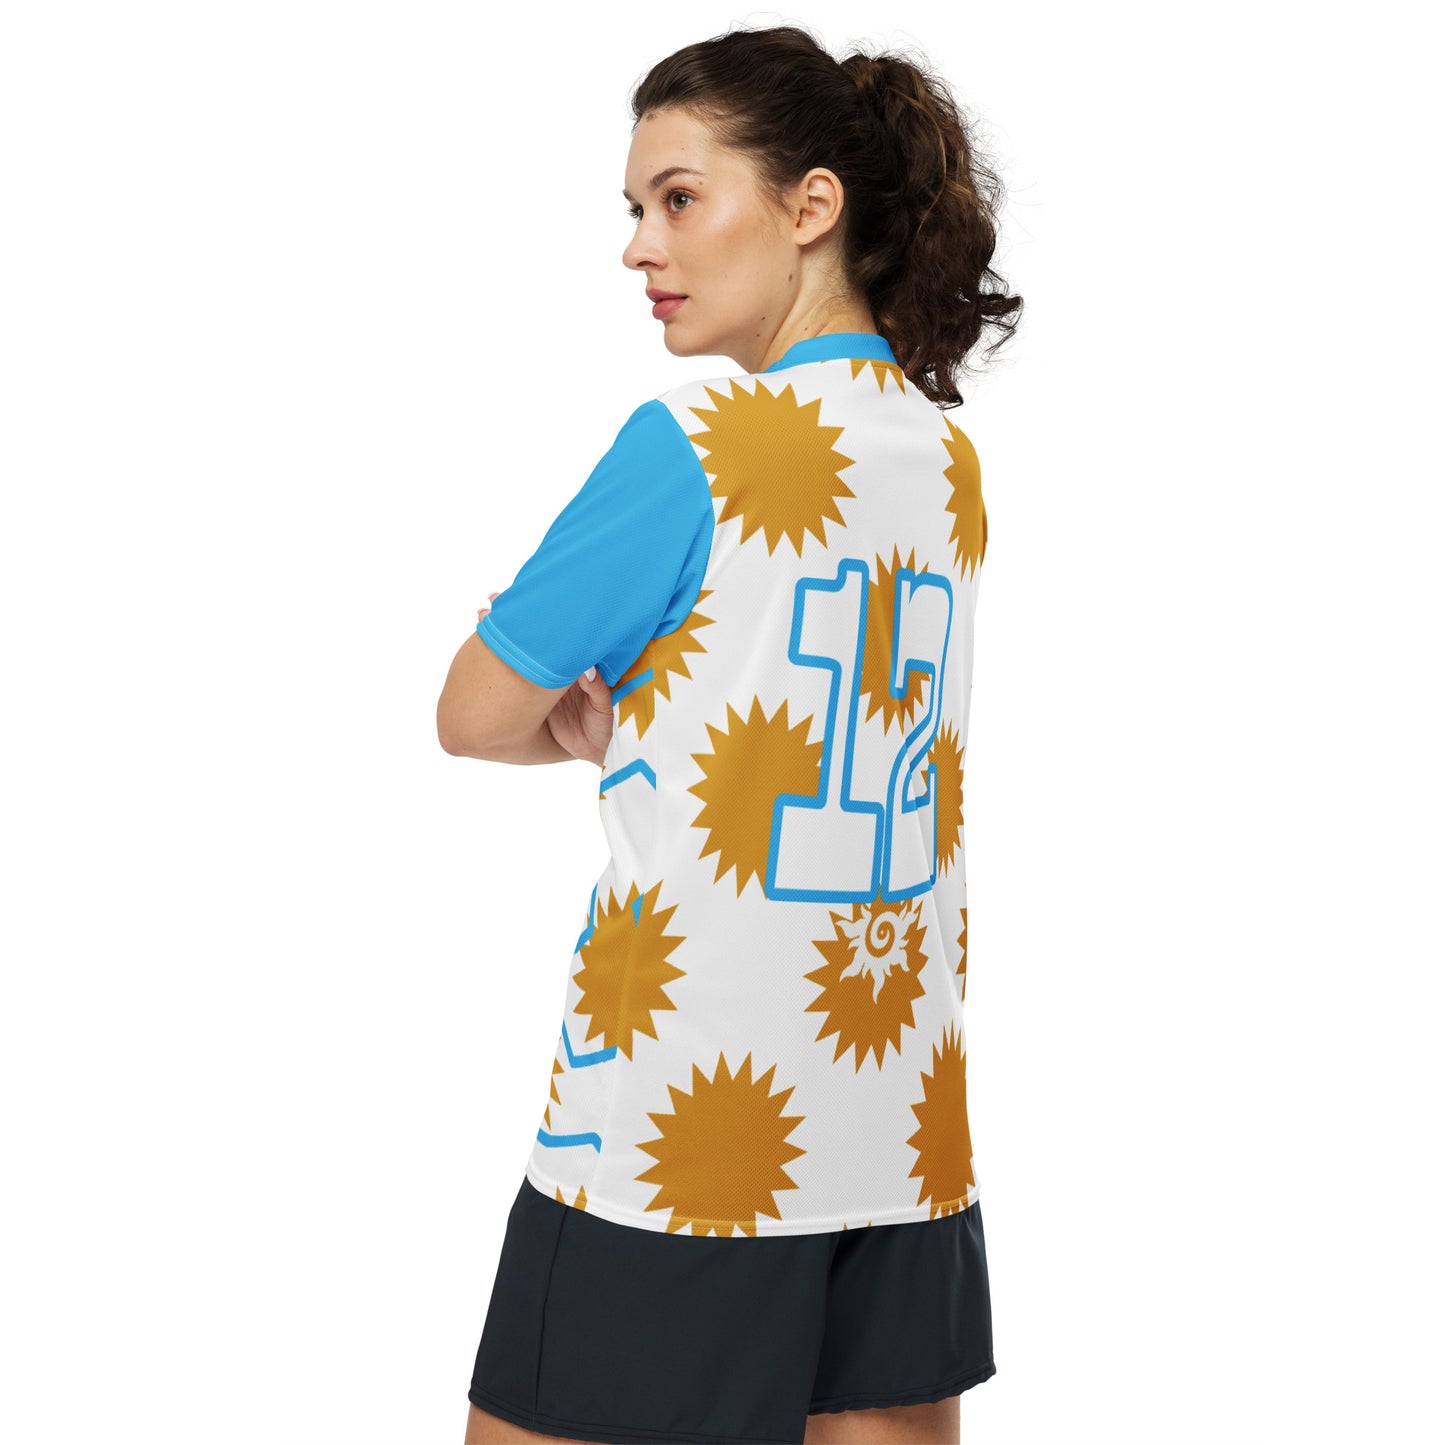 Recycled Unisex Sports Jersey ActSun 2